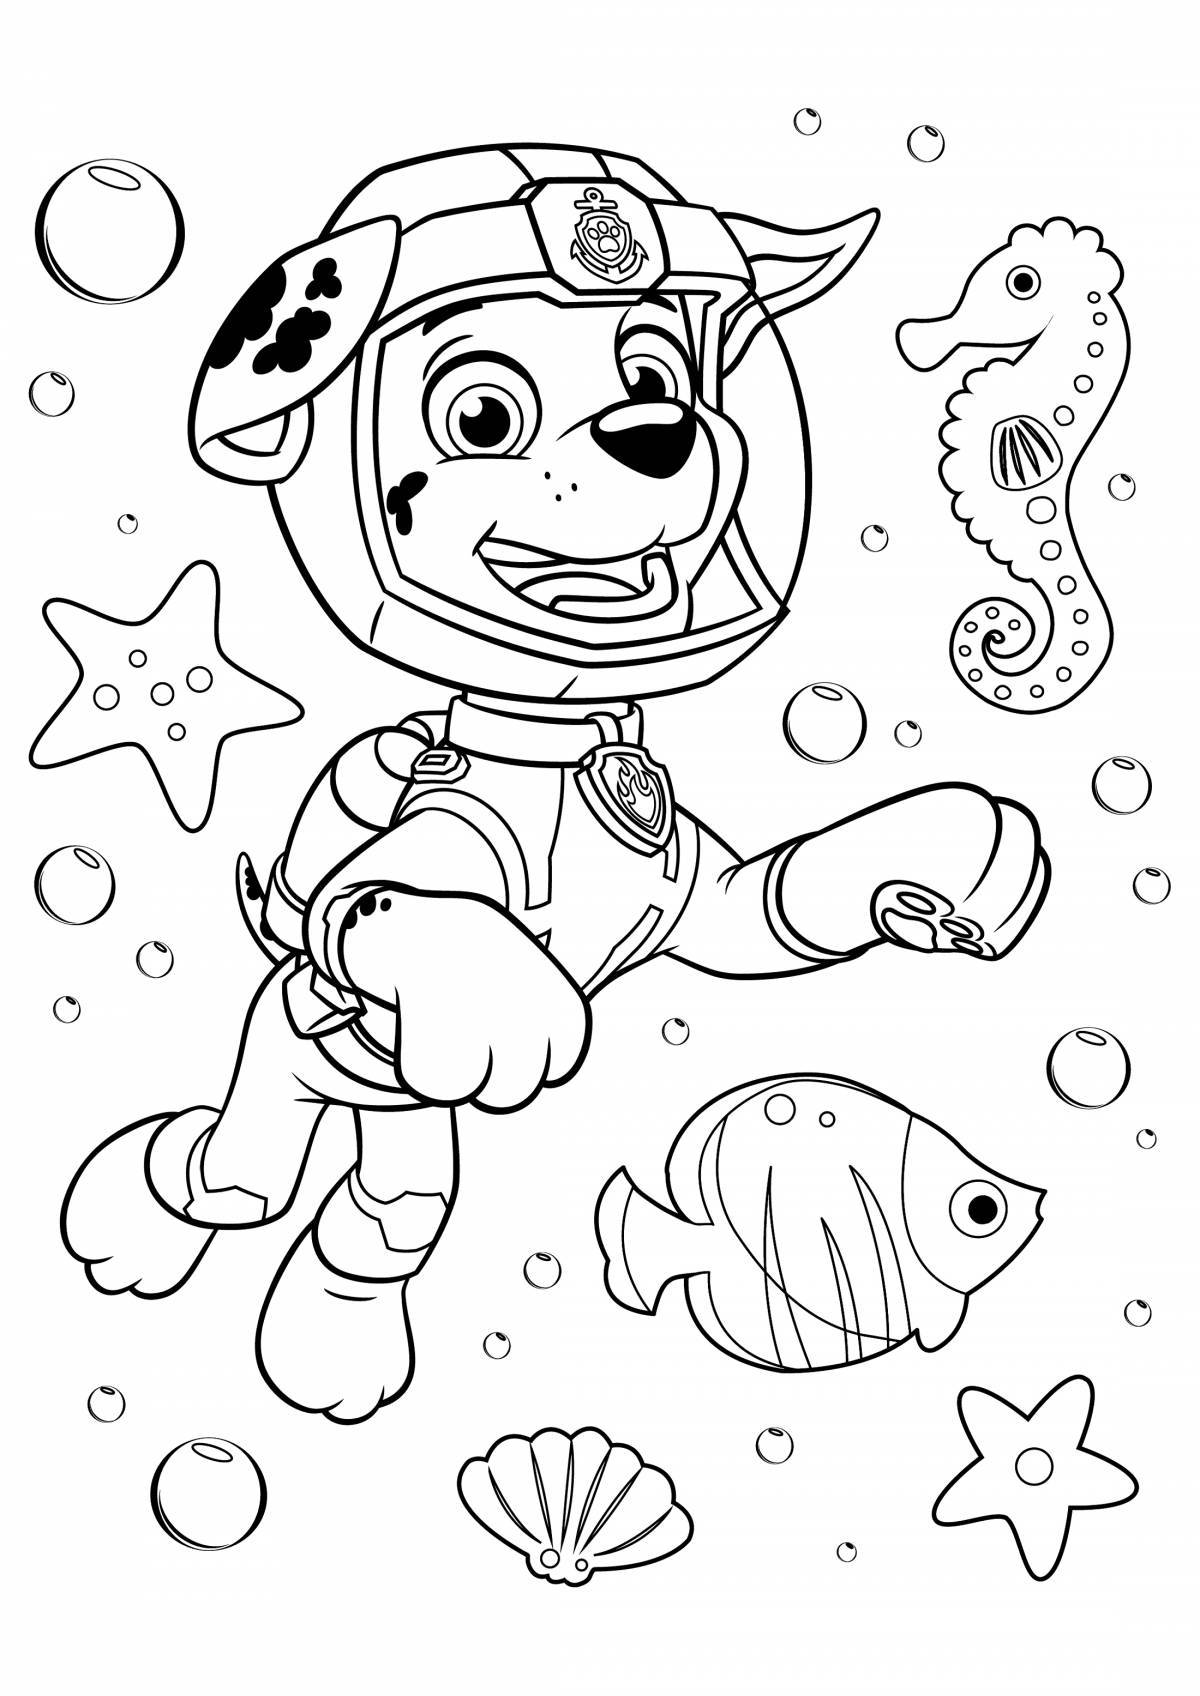 Colorful Paw Patrol Marshal Coloring Page